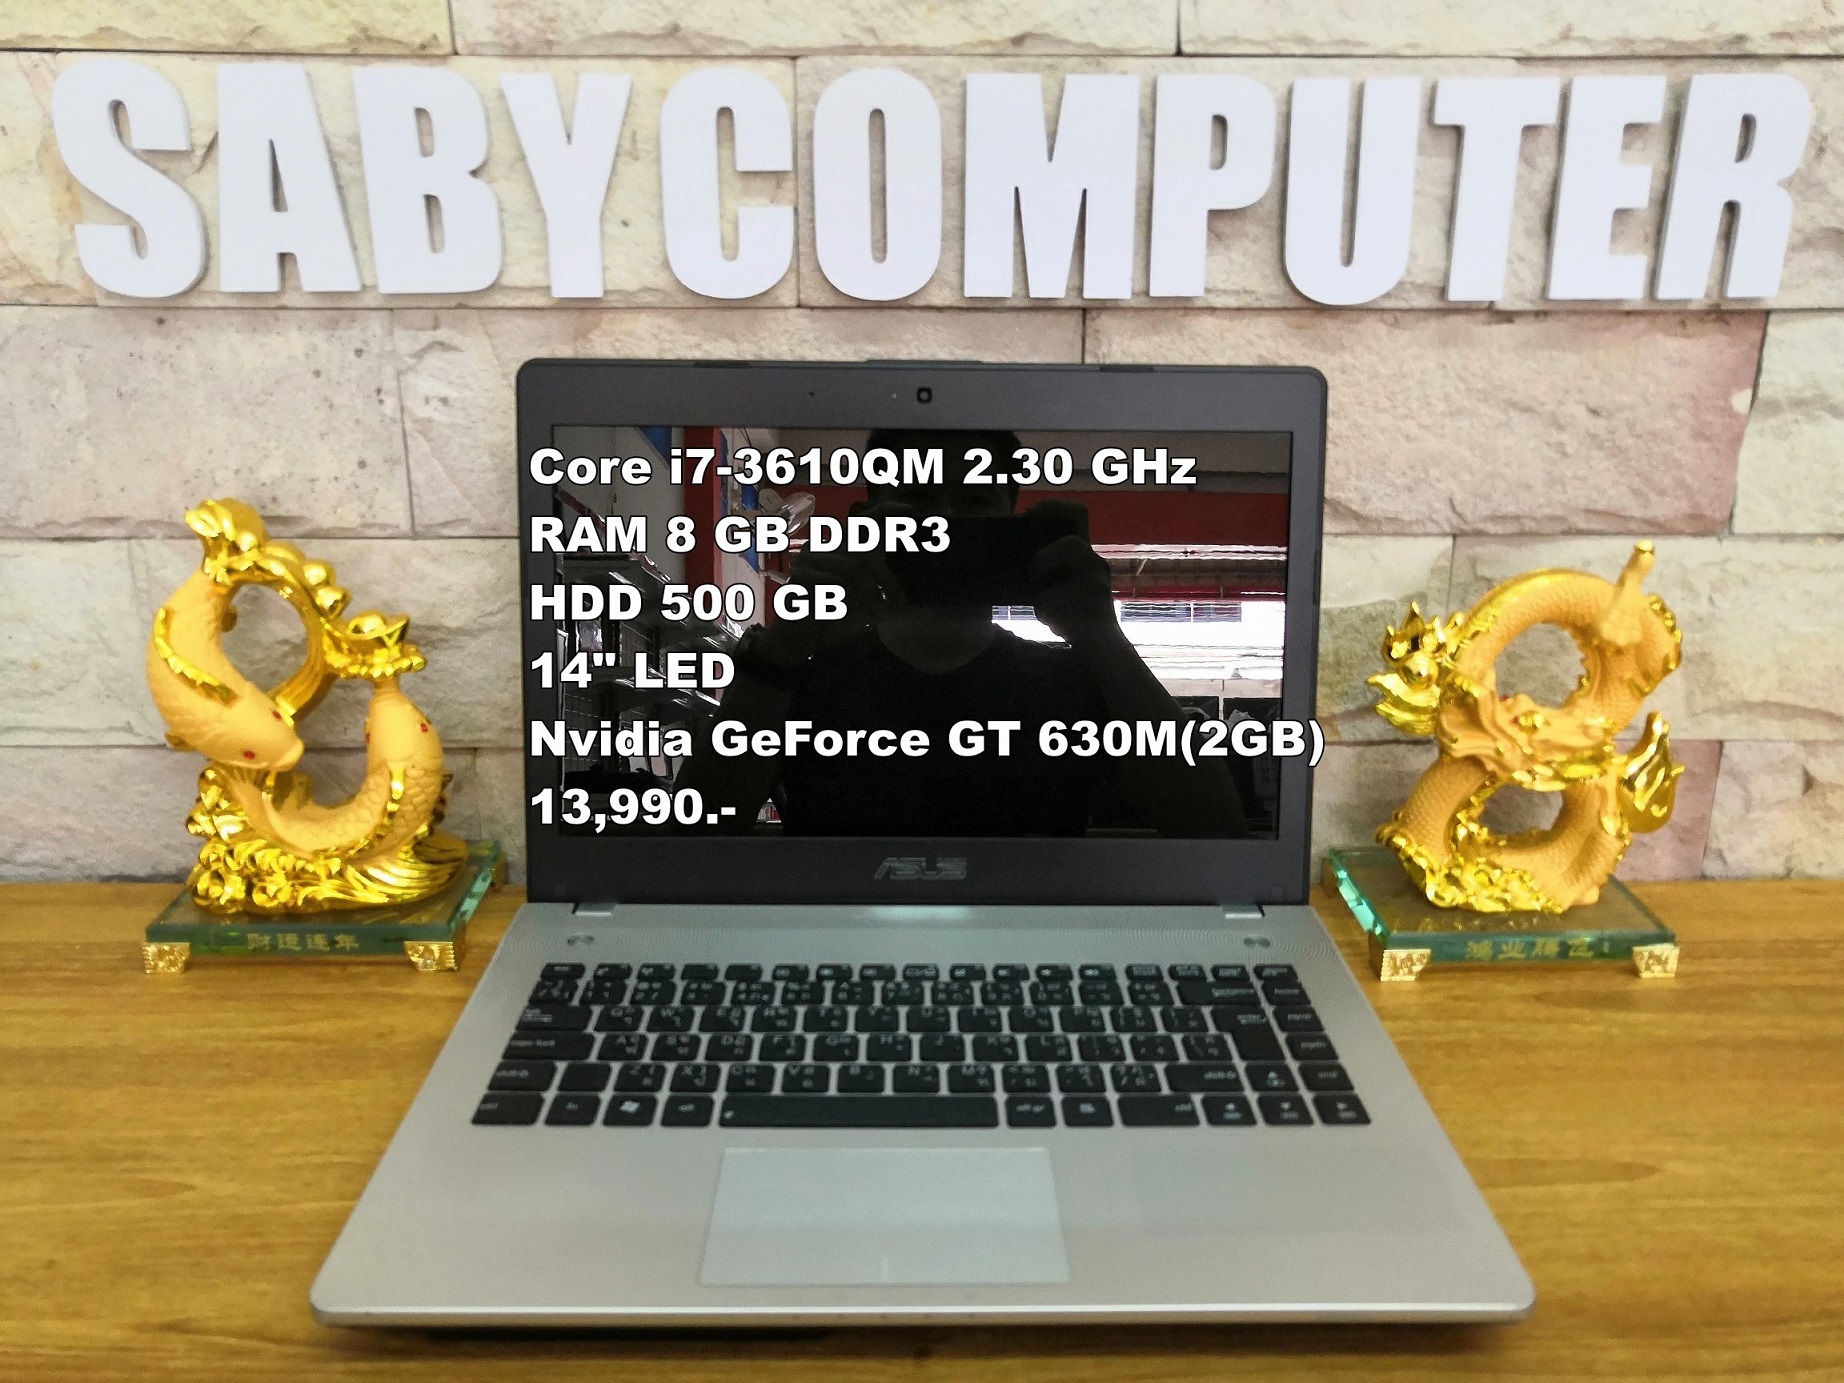 Used Notebook โน๊ตบุ๊ค ASUS i7/RAM 8GB/HDD 500 GB/จอ 14